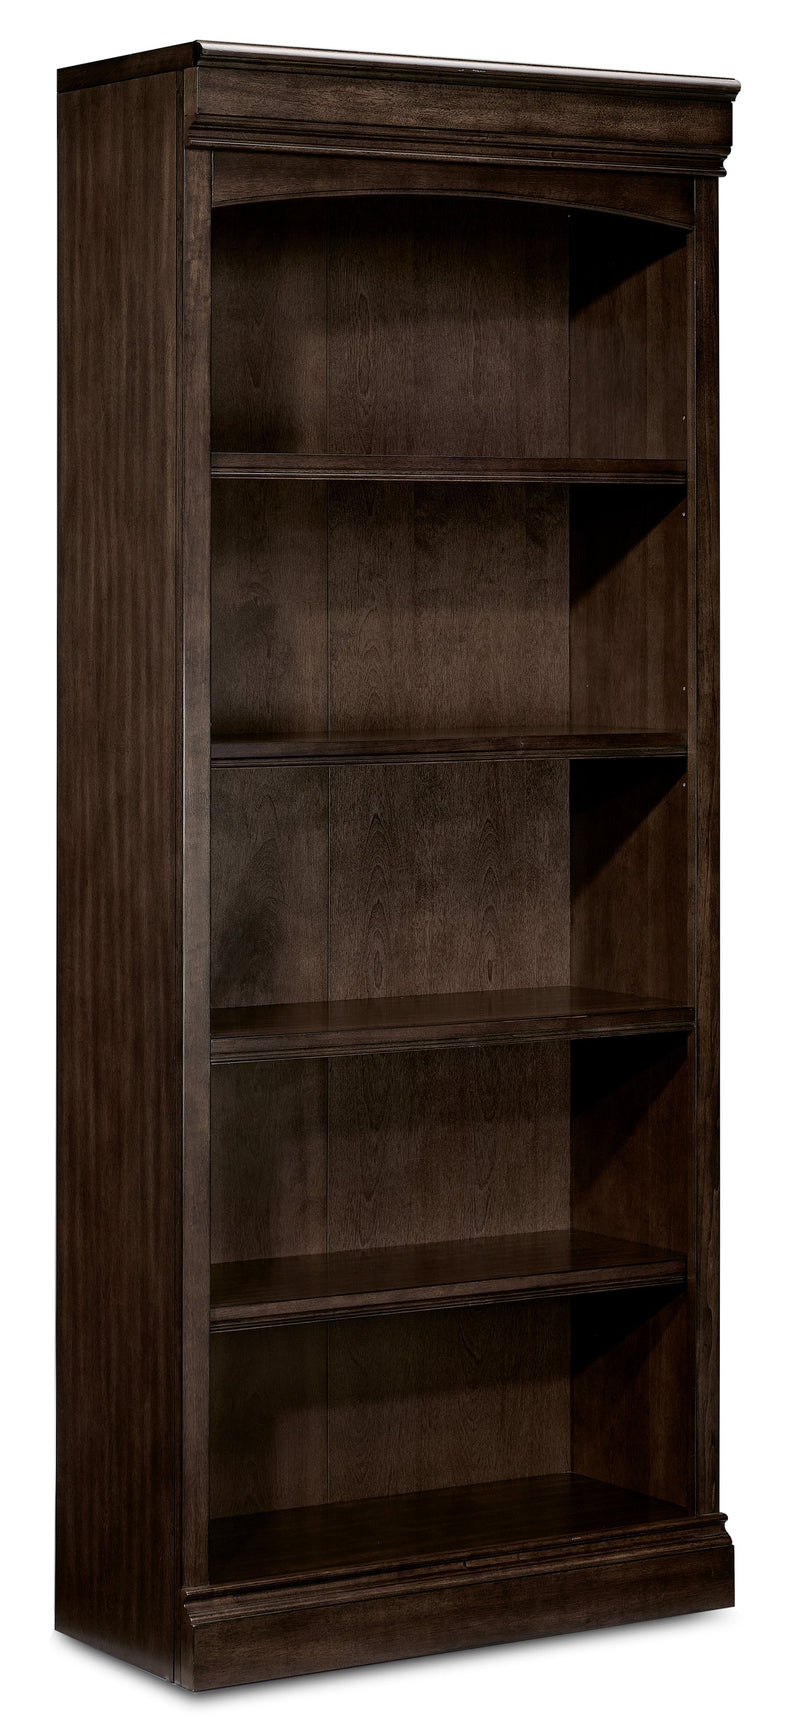 Shane Open Bookcase - Tuscany Brown